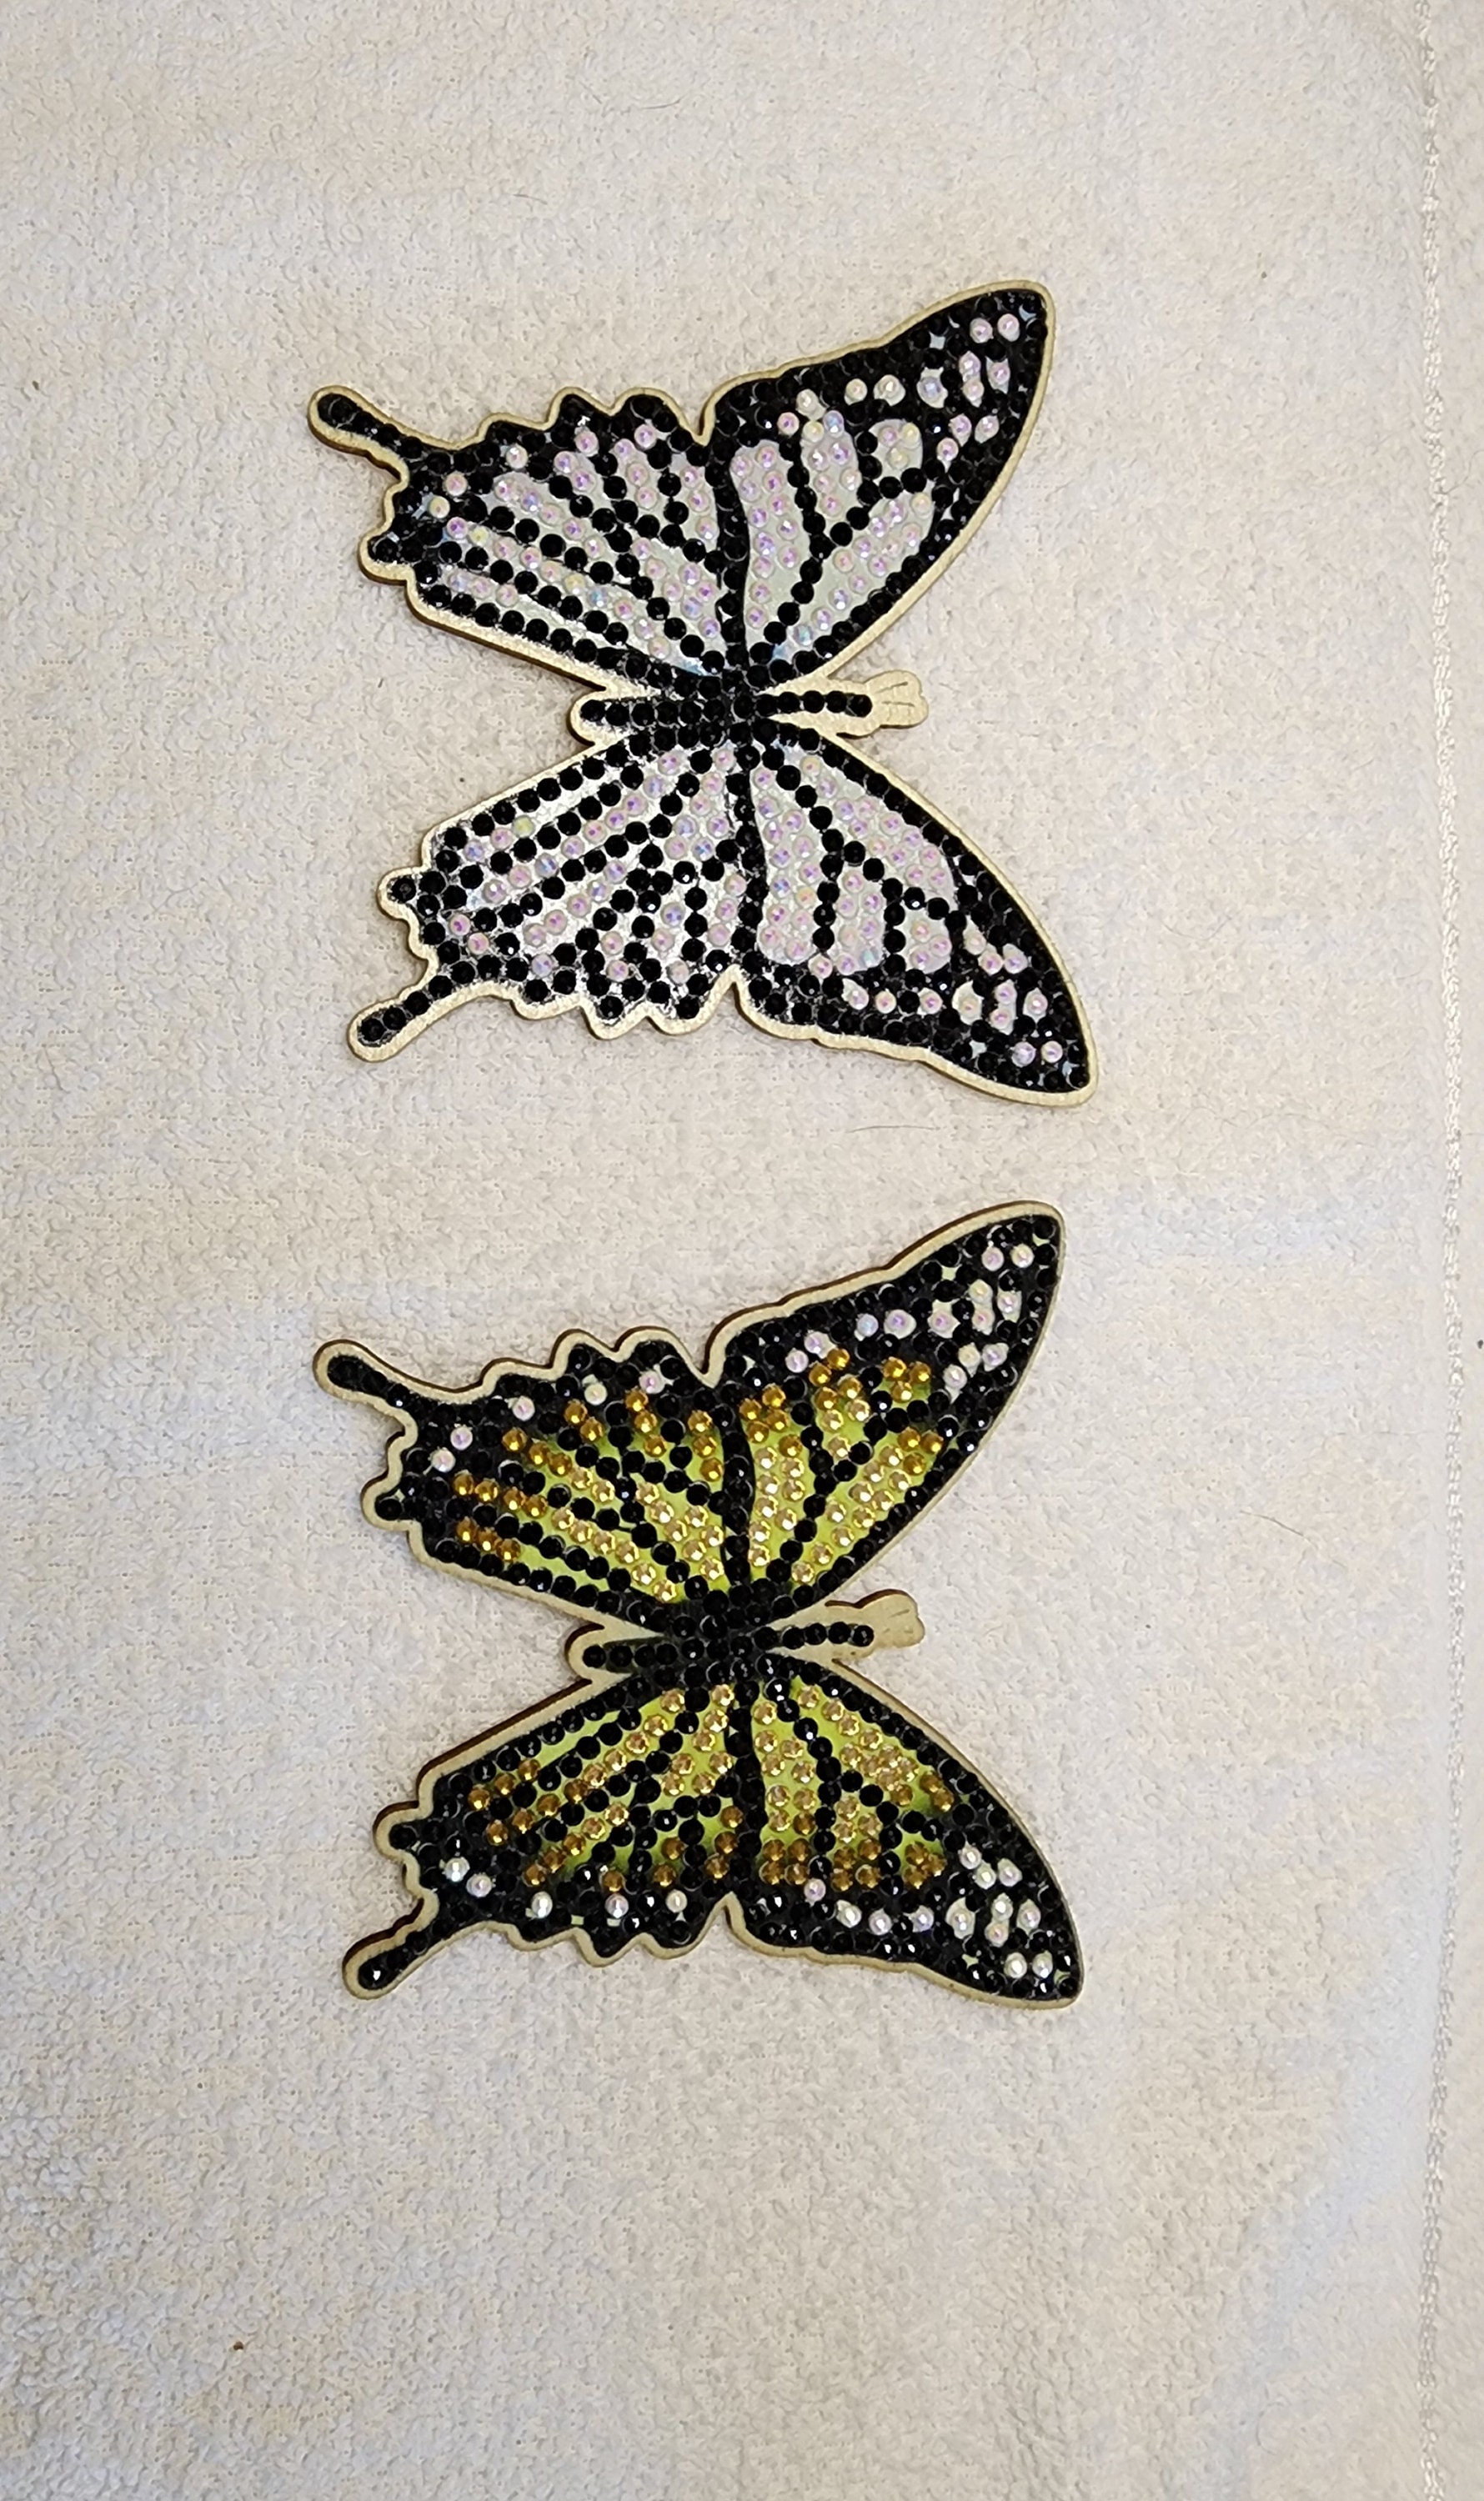 2 Butterfly Diamond Art Magnets White and Green 